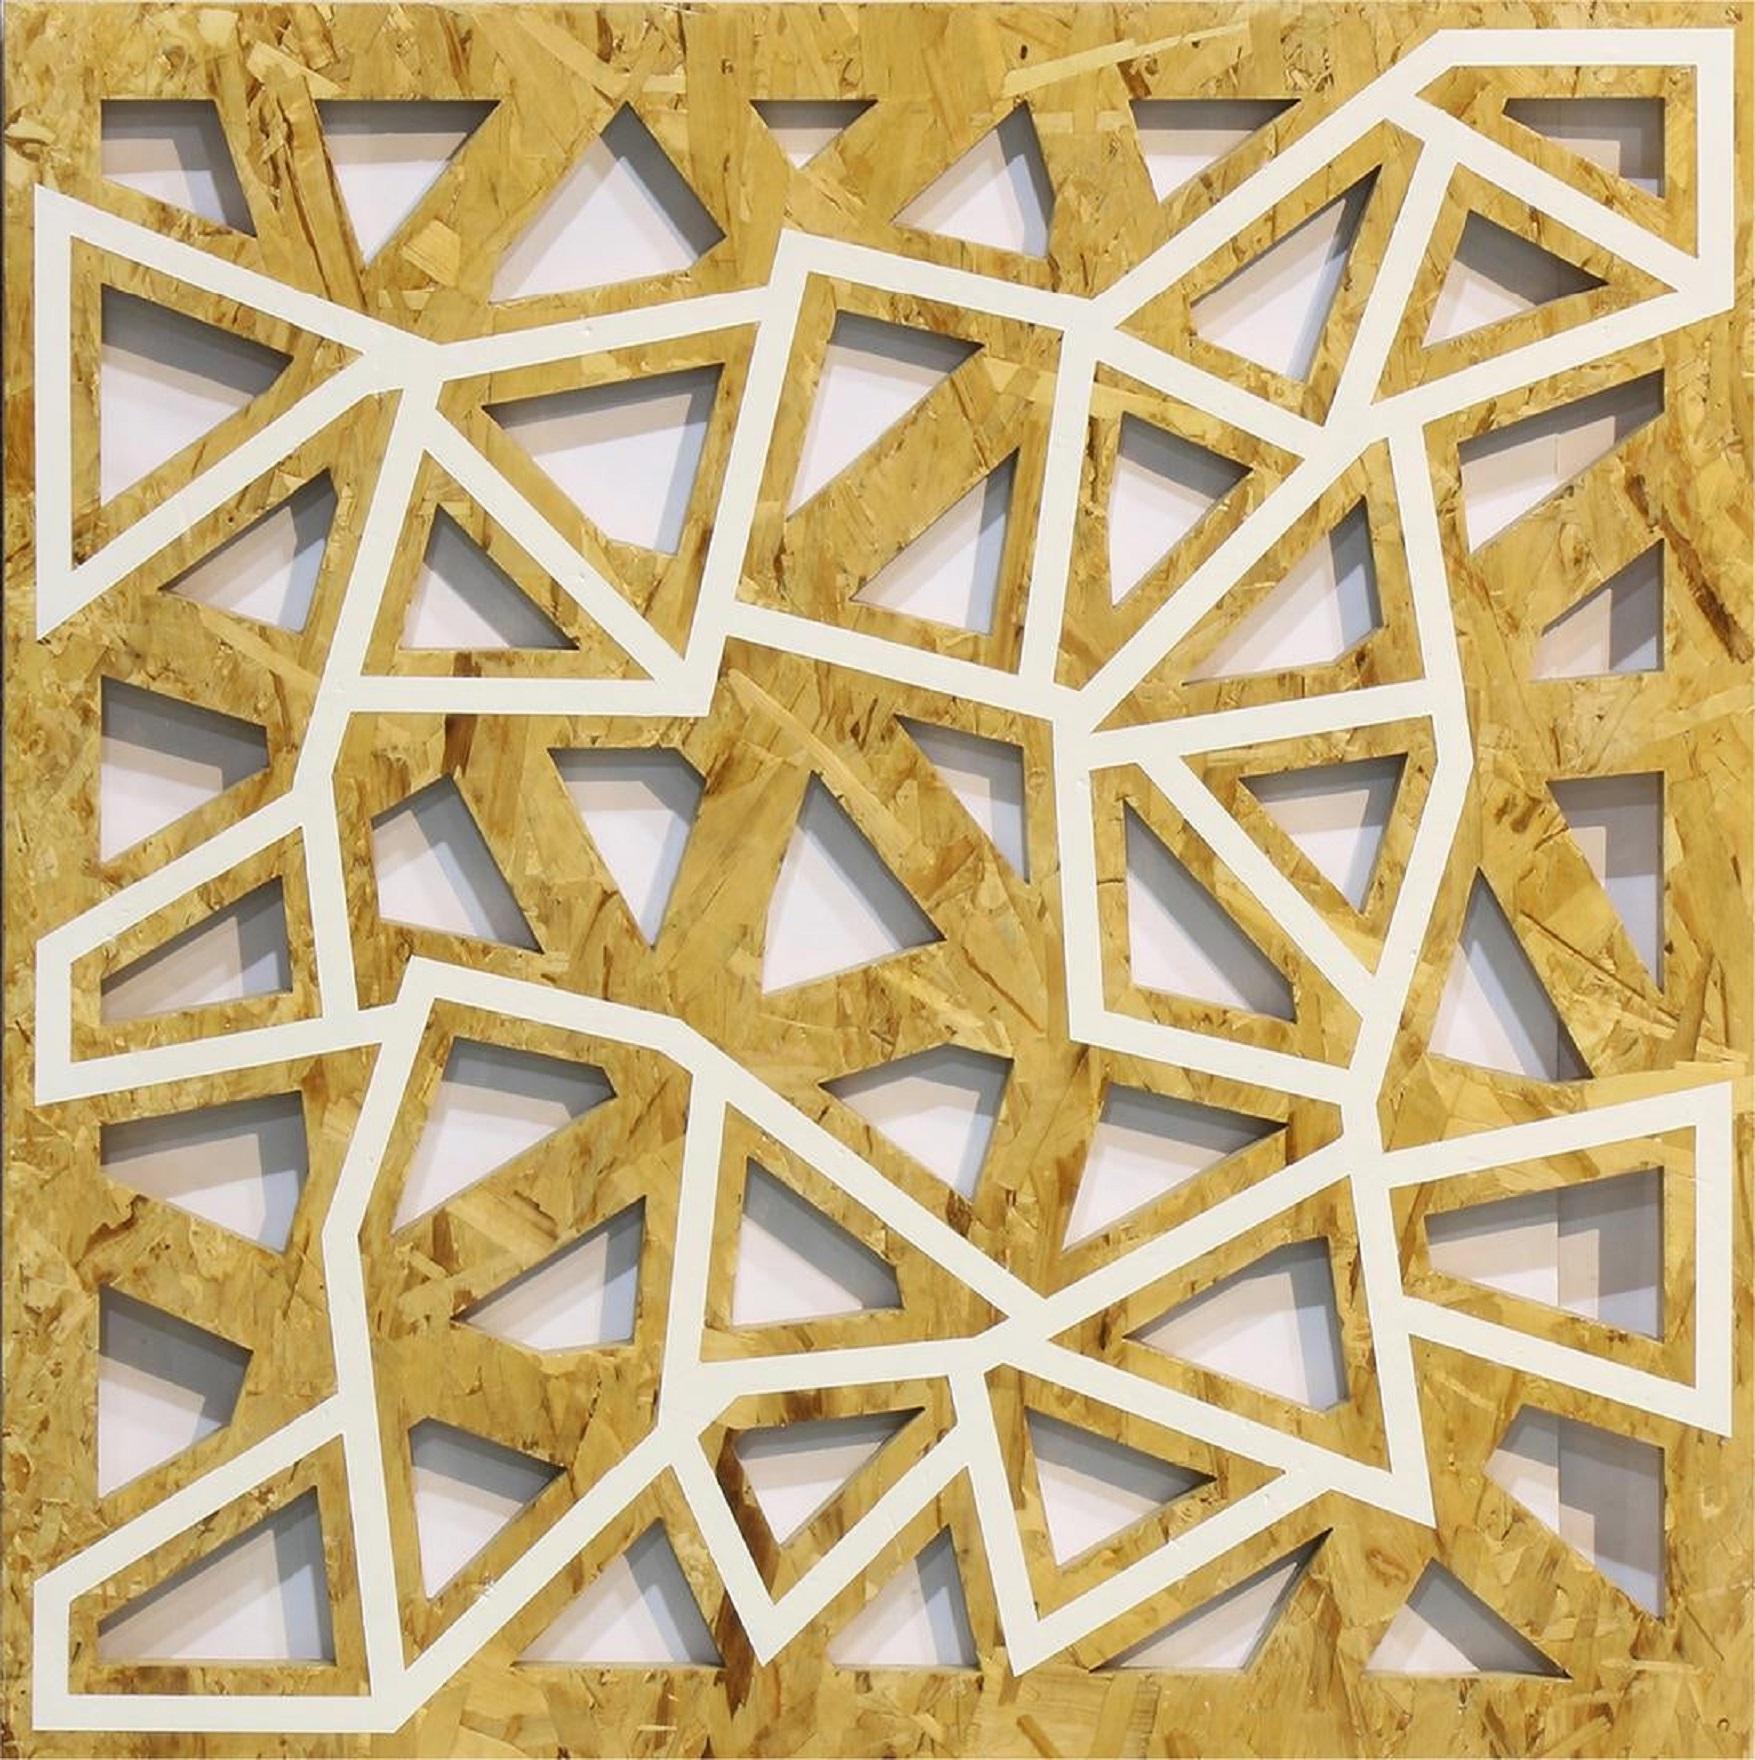 Oil-based alkyd enamel on plywood panel with cuts. this is a cut plywood wall relief sculpture with paint on it. This has an architectural quality to it. 

Peter Wegner (born 1963) is an American artist whose works consist of painting, photograph,